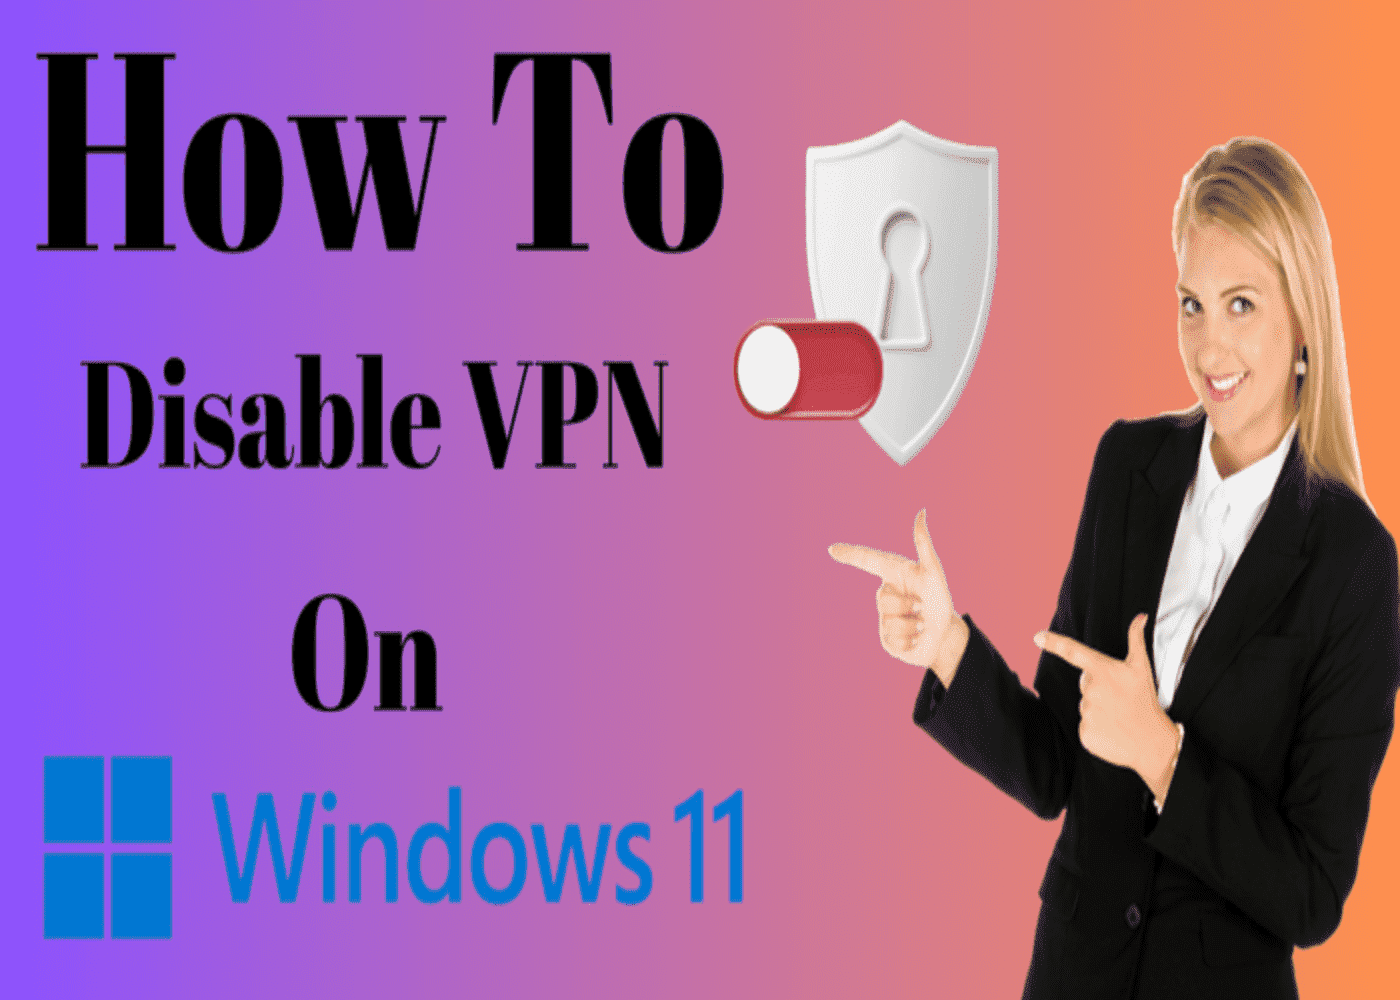 How to Disable VPN on Windows 11